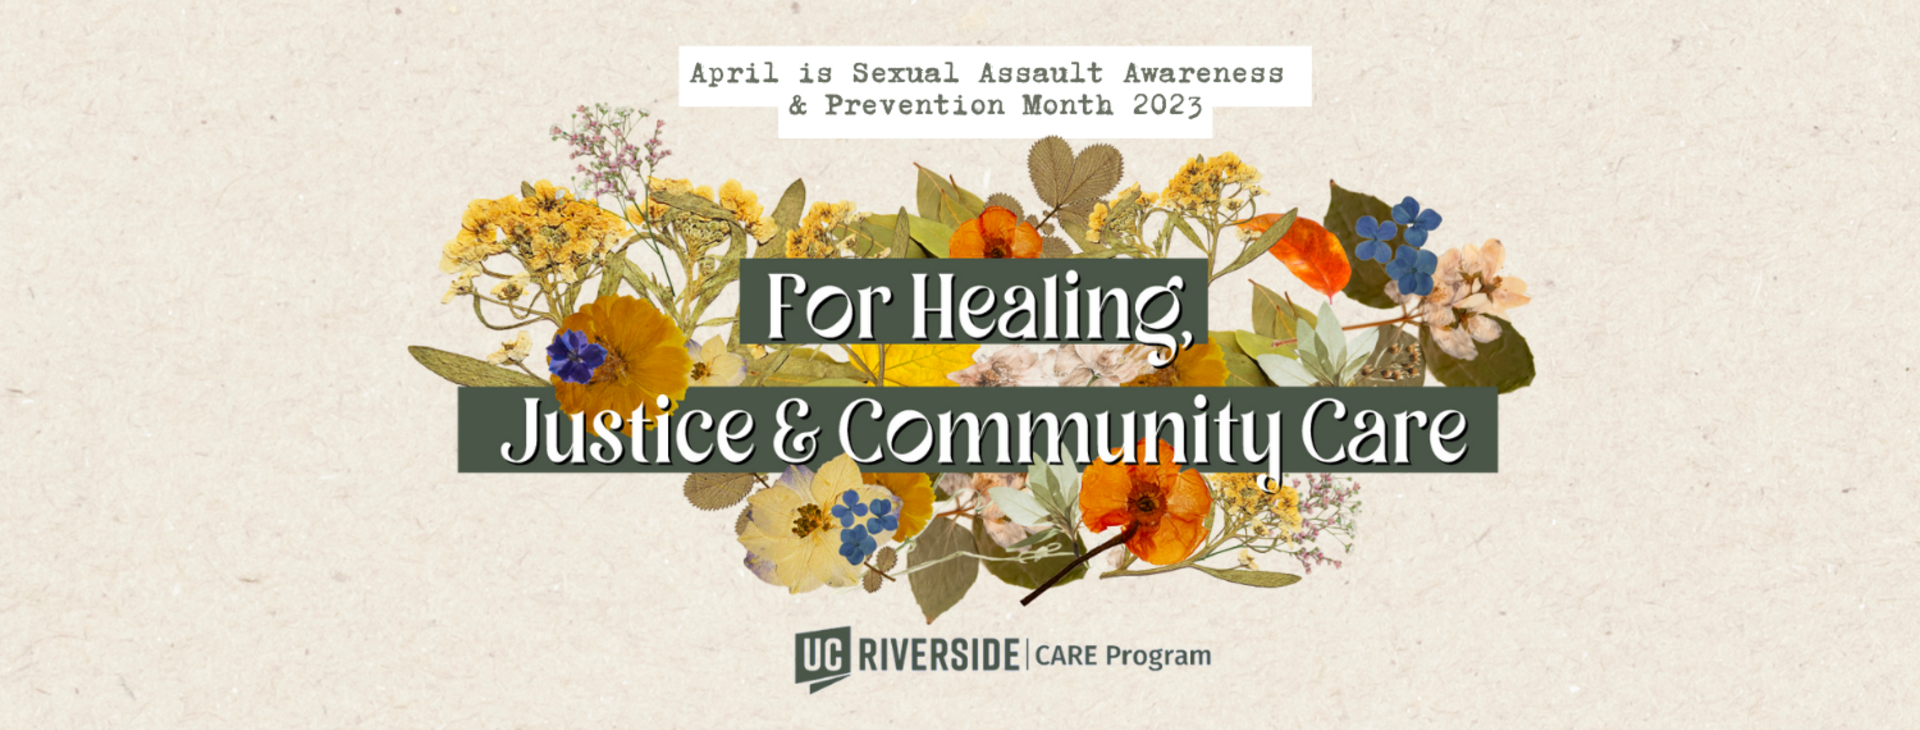 April is Sexual Assault Awareness & Prevention Month. For Justice, Healing & Community Care.